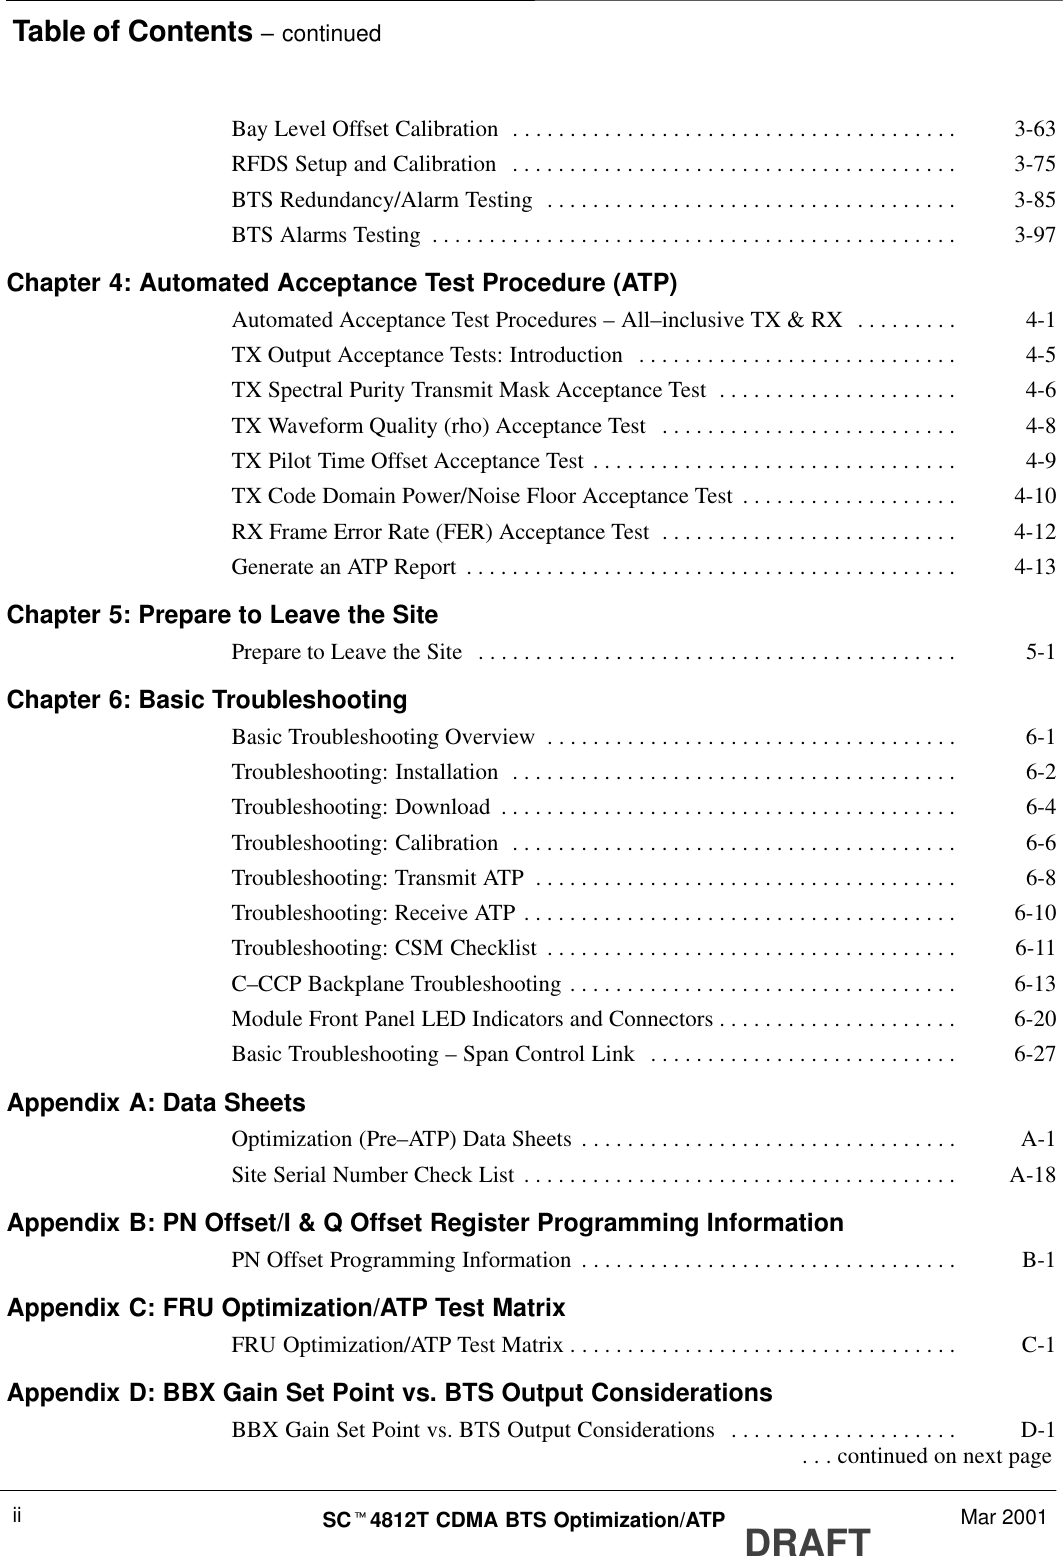 Table of Contents – continuedDRAFTSCt4812T CDMA BTS Optimization/ATP Mar 2001iiBay Level Offset Calibration 3-63. . . . . . . . . . . . . . . . . . . . . . . . . . . . . . . . . . . . . . . RFDS Setup and Calibration 3-75. . . . . . . . . . . . . . . . . . . . . . . . . . . . . . . . . . . . . . . BTS Redundancy/Alarm Testing 3-85. . . . . . . . . . . . . . . . . . . . . . . . . . . . . . . . . . . . BTS Alarms Testing 3-97. . . . . . . . . . . . . . . . . . . . . . . . . . . . . . . . . . . . . . . . . . . . . . Chapter 4: Automated Acceptance Test Procedure (ATP)Automated Acceptance Test Procedures – All–inclusive TX &amp; RX 4-1. . . . . . . . . TX Output Acceptance Tests: Introduction 4-5. . . . . . . . . . . . . . . . . . . . . . . . . . . . TX Spectral Purity Transmit Mask Acceptance Test 4-6. . . . . . . . . . . . . . . . . . . . . TX Waveform Quality (rho) Acceptance Test 4-8. . . . . . . . . . . . . . . . . . . . . . . . . . TX Pilot Time Offset Acceptance Test 4-9. . . . . . . . . . . . . . . . . . . . . . . . . . . . . . . . TX Code Domain Power/Noise Floor Acceptance Test 4-10. . . . . . . . . . . . . . . . . . . RX Frame Error Rate (FER) Acceptance Test 4-12. . . . . . . . . . . . . . . . . . . . . . . . . . Generate an ATP Report 4-13. . . . . . . . . . . . . . . . . . . . . . . . . . . . . . . . . . . . . . . . . . . Chapter 5: Prepare to Leave the SitePrepare to Leave the Site 5-1. . . . . . . . . . . . . . . . . . . . . . . . . . . . . . . . . . . . . . . . . . Chapter 6: Basic TroubleshootingBasic Troubleshooting Overview 6-1. . . . . . . . . . . . . . . . . . . . . . . . . . . . . . . . . . . . Troubleshooting: Installation 6-2. . . . . . . . . . . . . . . . . . . . . . . . . . . . . . . . . . . . . . . Troubleshooting: Download 6-4. . . . . . . . . . . . . . . . . . . . . . . . . . . . . . . . . . . . . . . . Troubleshooting: Calibration 6-6. . . . . . . . . . . . . . . . . . . . . . . . . . . . . . . . . . . . . . . Troubleshooting: Transmit ATP 6-8. . . . . . . . . . . . . . . . . . . . . . . . . . . . . . . . . . . . . Troubleshooting: Receive ATP 6-10. . . . . . . . . . . . . . . . . . . . . . . . . . . . . . . . . . . . . . Troubleshooting: CSM Checklist 6-11. . . . . . . . . . . . . . . . . . . . . . . . . . . . . . . . . . . . C–CCP Backplane Troubleshooting 6-13. . . . . . . . . . . . . . . . . . . . . . . . . . . . . . . . . . Module Front Panel LED Indicators and Connectors 6-20. . . . . . . . . . . . . . . . . . . . . Basic Troubleshooting – Span Control Link 6-27. . . . . . . . . . . . . . . . . . . . . . . . . . . Appendix A: Data SheetsOptimization (Pre–ATP) Data Sheets A-1. . . . . . . . . . . . . . . . . . . . . . . . . . . . . . . . . Site Serial Number Check List A-18. . . . . . . . . . . . . . . . . . . . . . . . . . . . . . . . . . . . . . Appendix B: PN Offset/I &amp; Q Offset Register Programming InformationPN Offset Programming Information B-1. . . . . . . . . . . . . . . . . . . . . . . . . . . . . . . . . Appendix C: FRU Optimization/ATP Test MatrixFRU Optimization/ATP Test Matrix C-1. . . . . . . . . . . . . . . . . . . . . . . . . . . . . . . . . . Appendix D: BBX Gain Set Point vs. BTS Output ConsiderationsBBX Gain Set Point vs. BTS Output Considerations D-1. . . . . . . . . . . . . . . . . . . .  . . . continued on next page